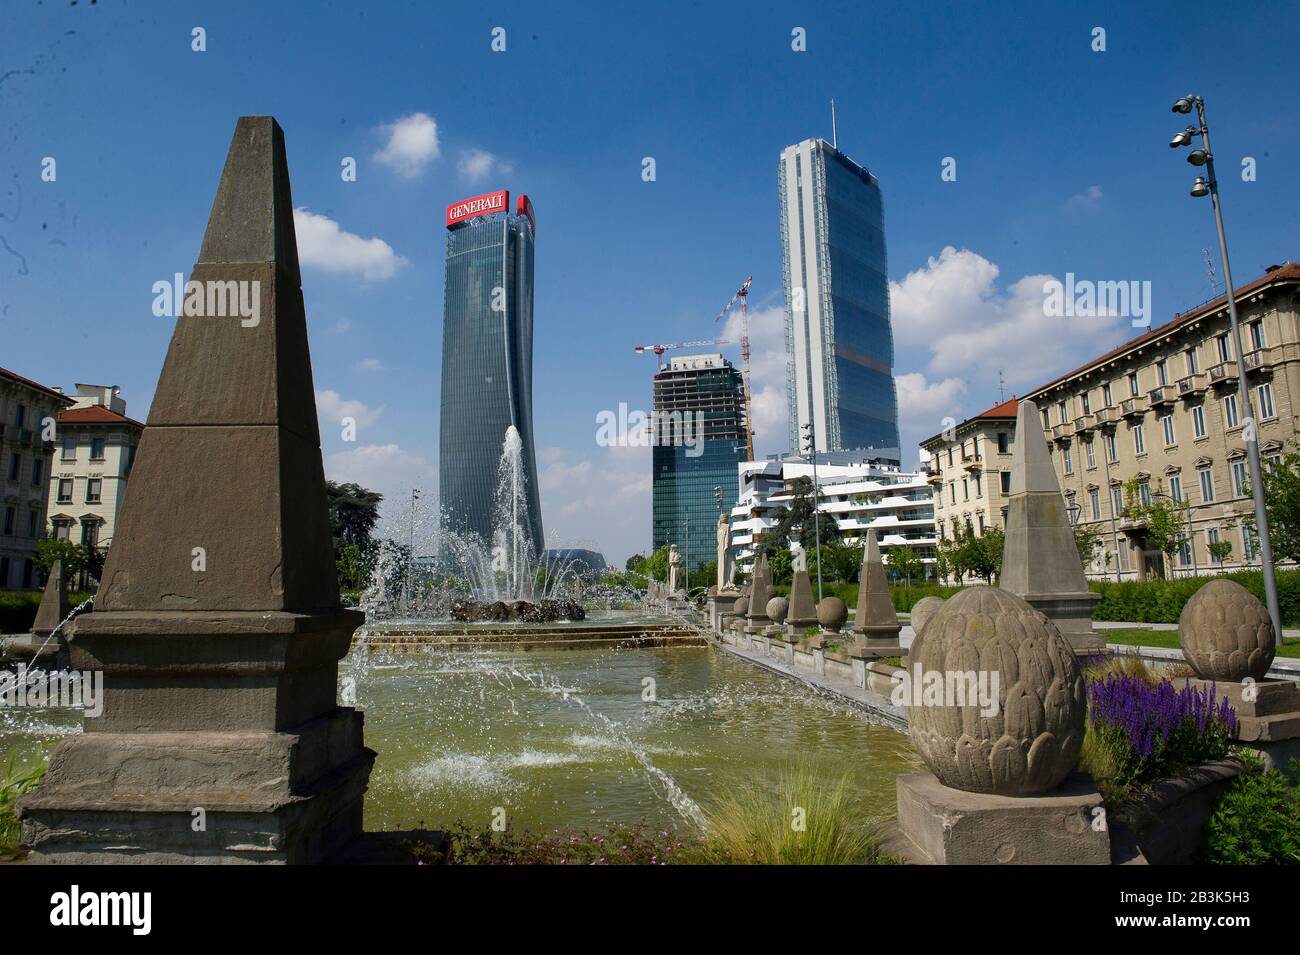 Italy, Lombardy, Milan, Citylife Shopping District. Skyline, on the left Generali Tower Called Lo Storto by arch. Zaha Hadid. Right Allianz Tower Called Il Dritto dell'arch. Harata Ysozaky. In the center Torre Terza Called the Curved by Daniel Liberskind. Stock Photo